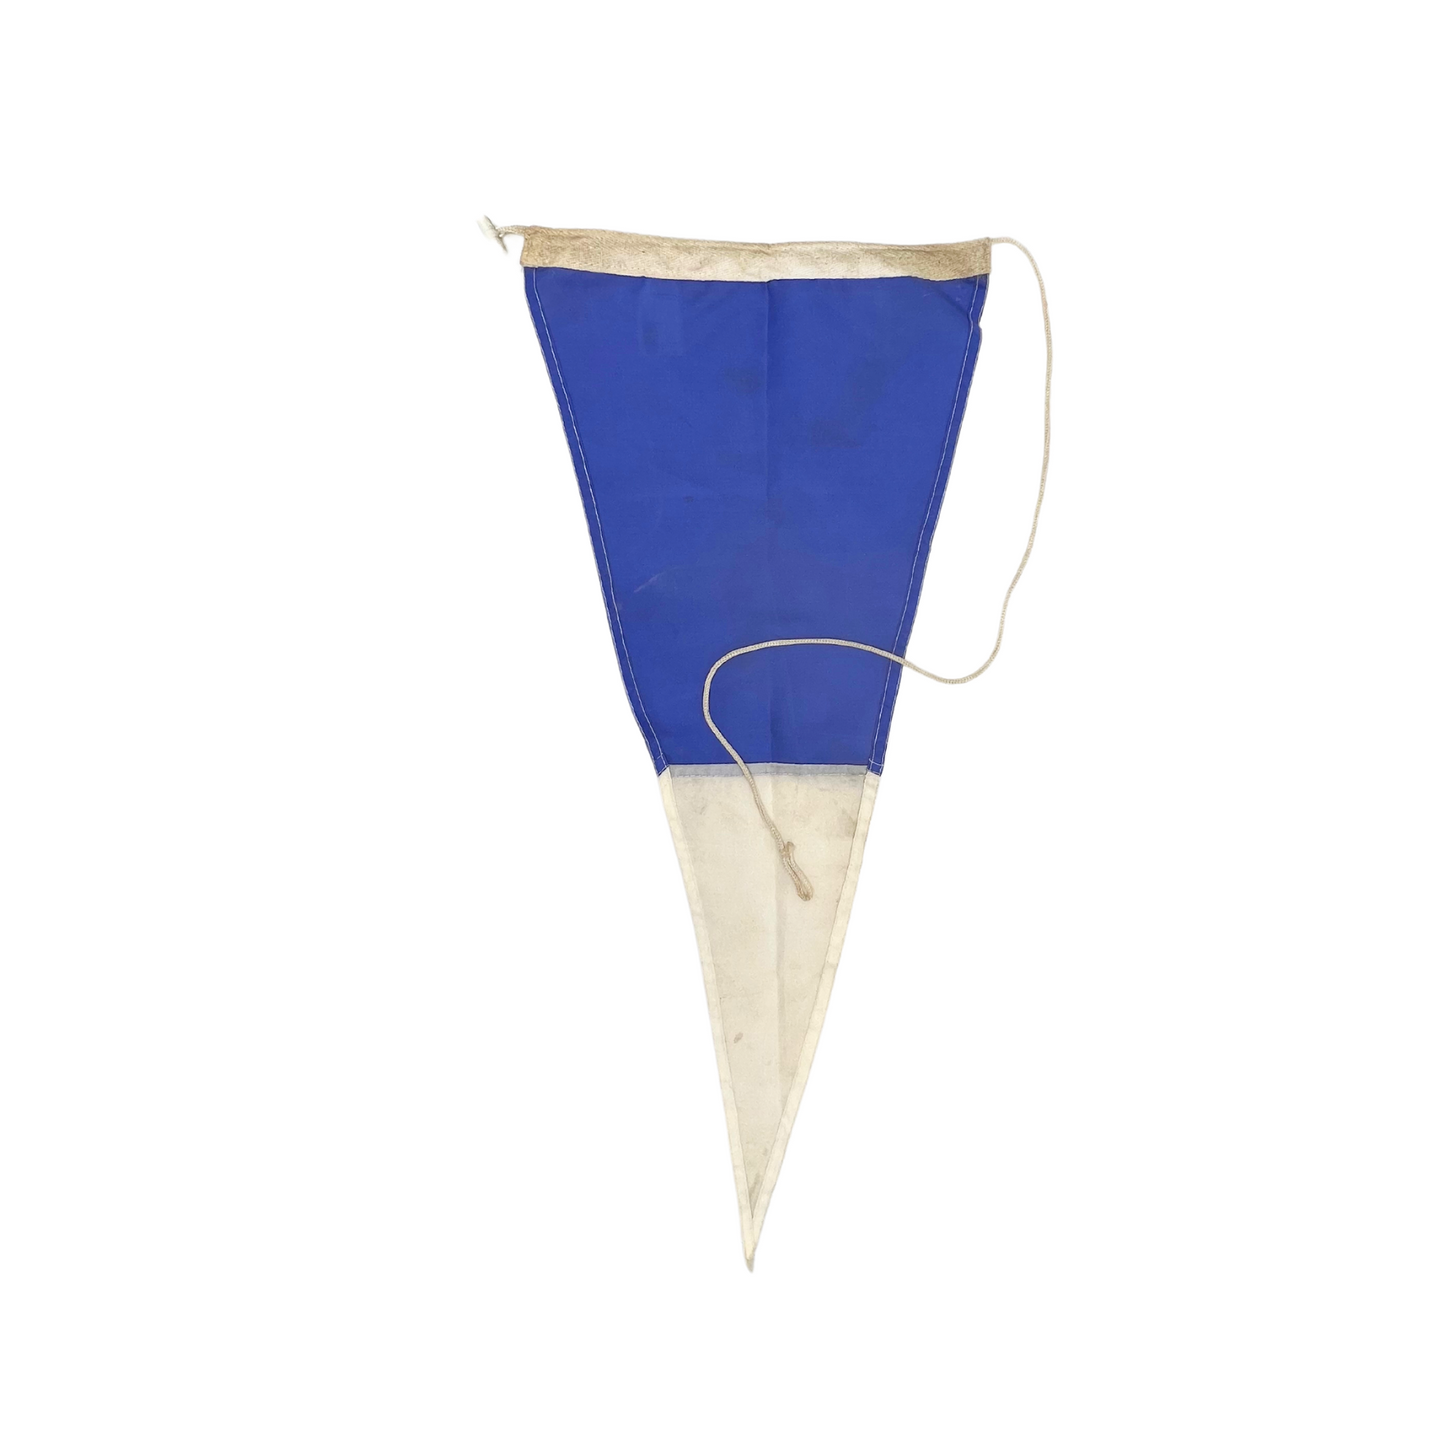 salvaged nautical signal flag - 2nd repeater